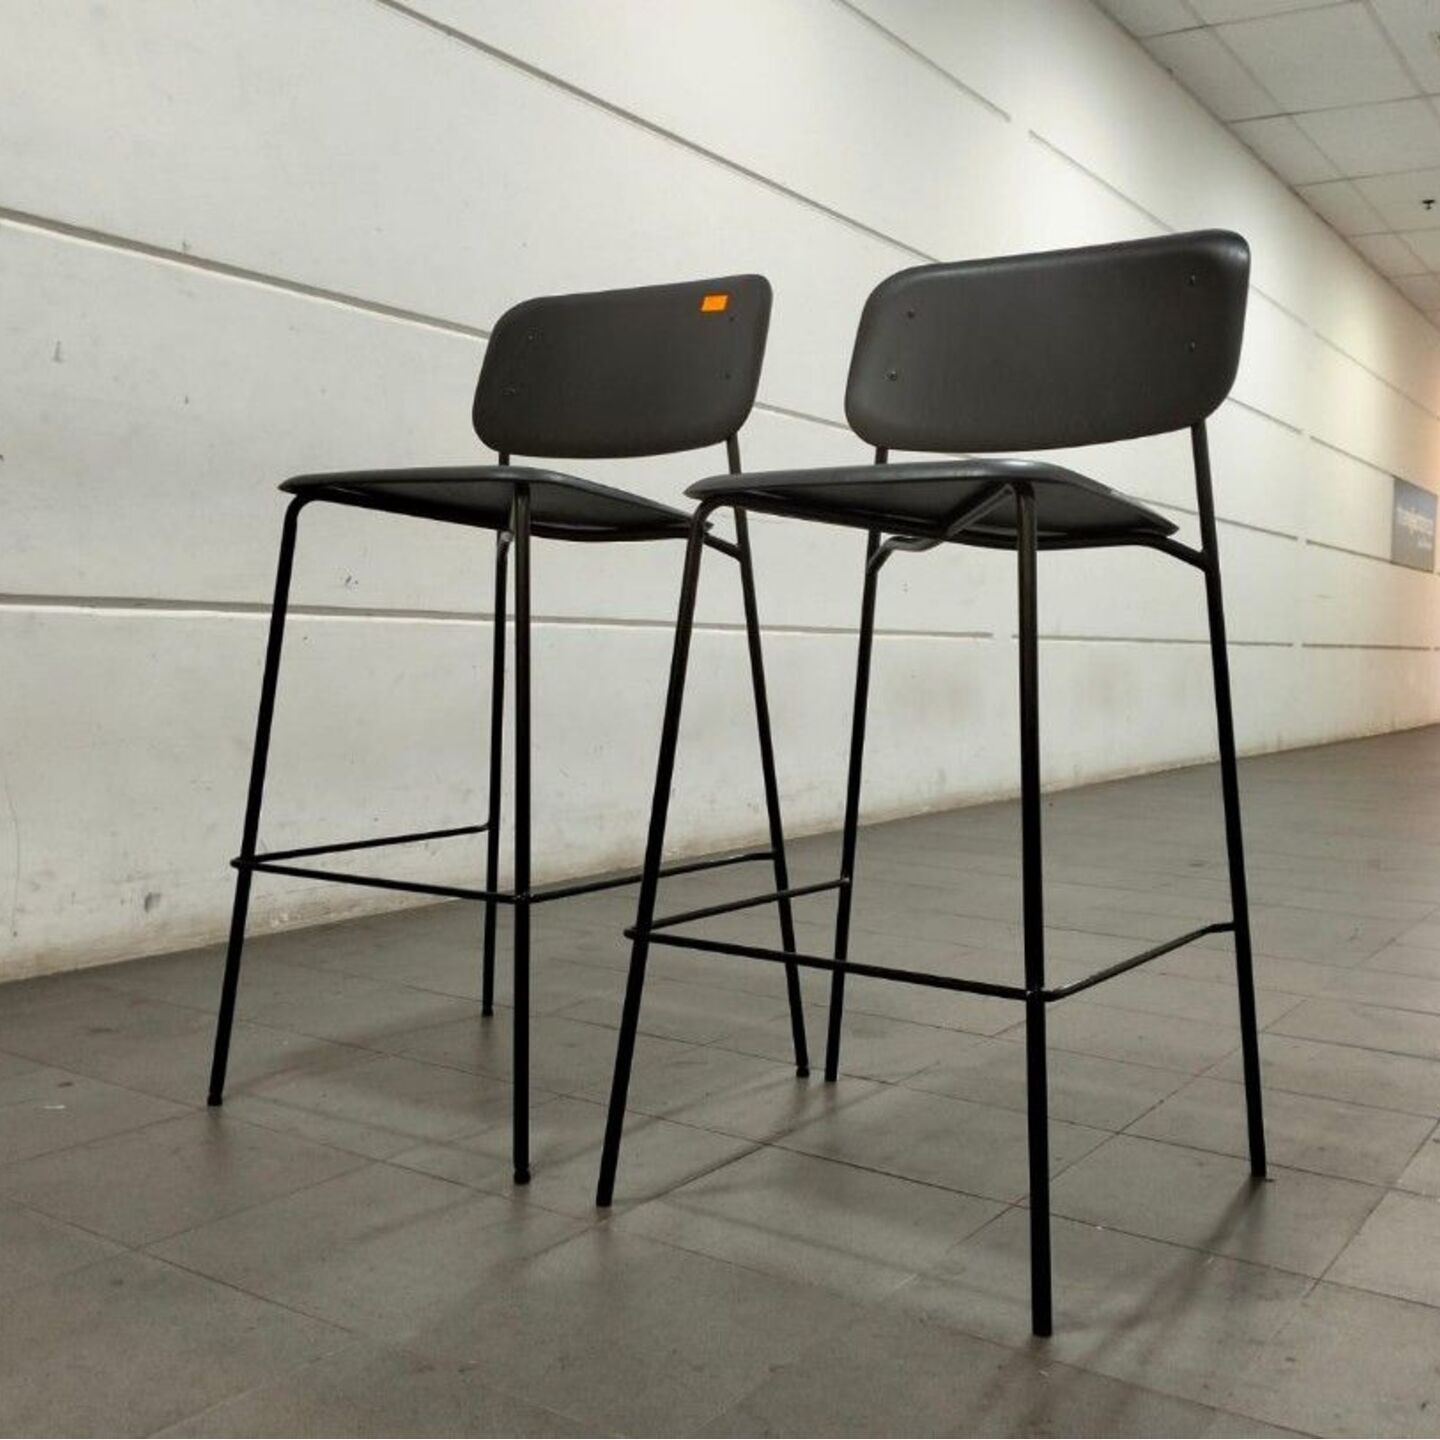 WRAITH Bar Chairs in BLACK (set of 2)